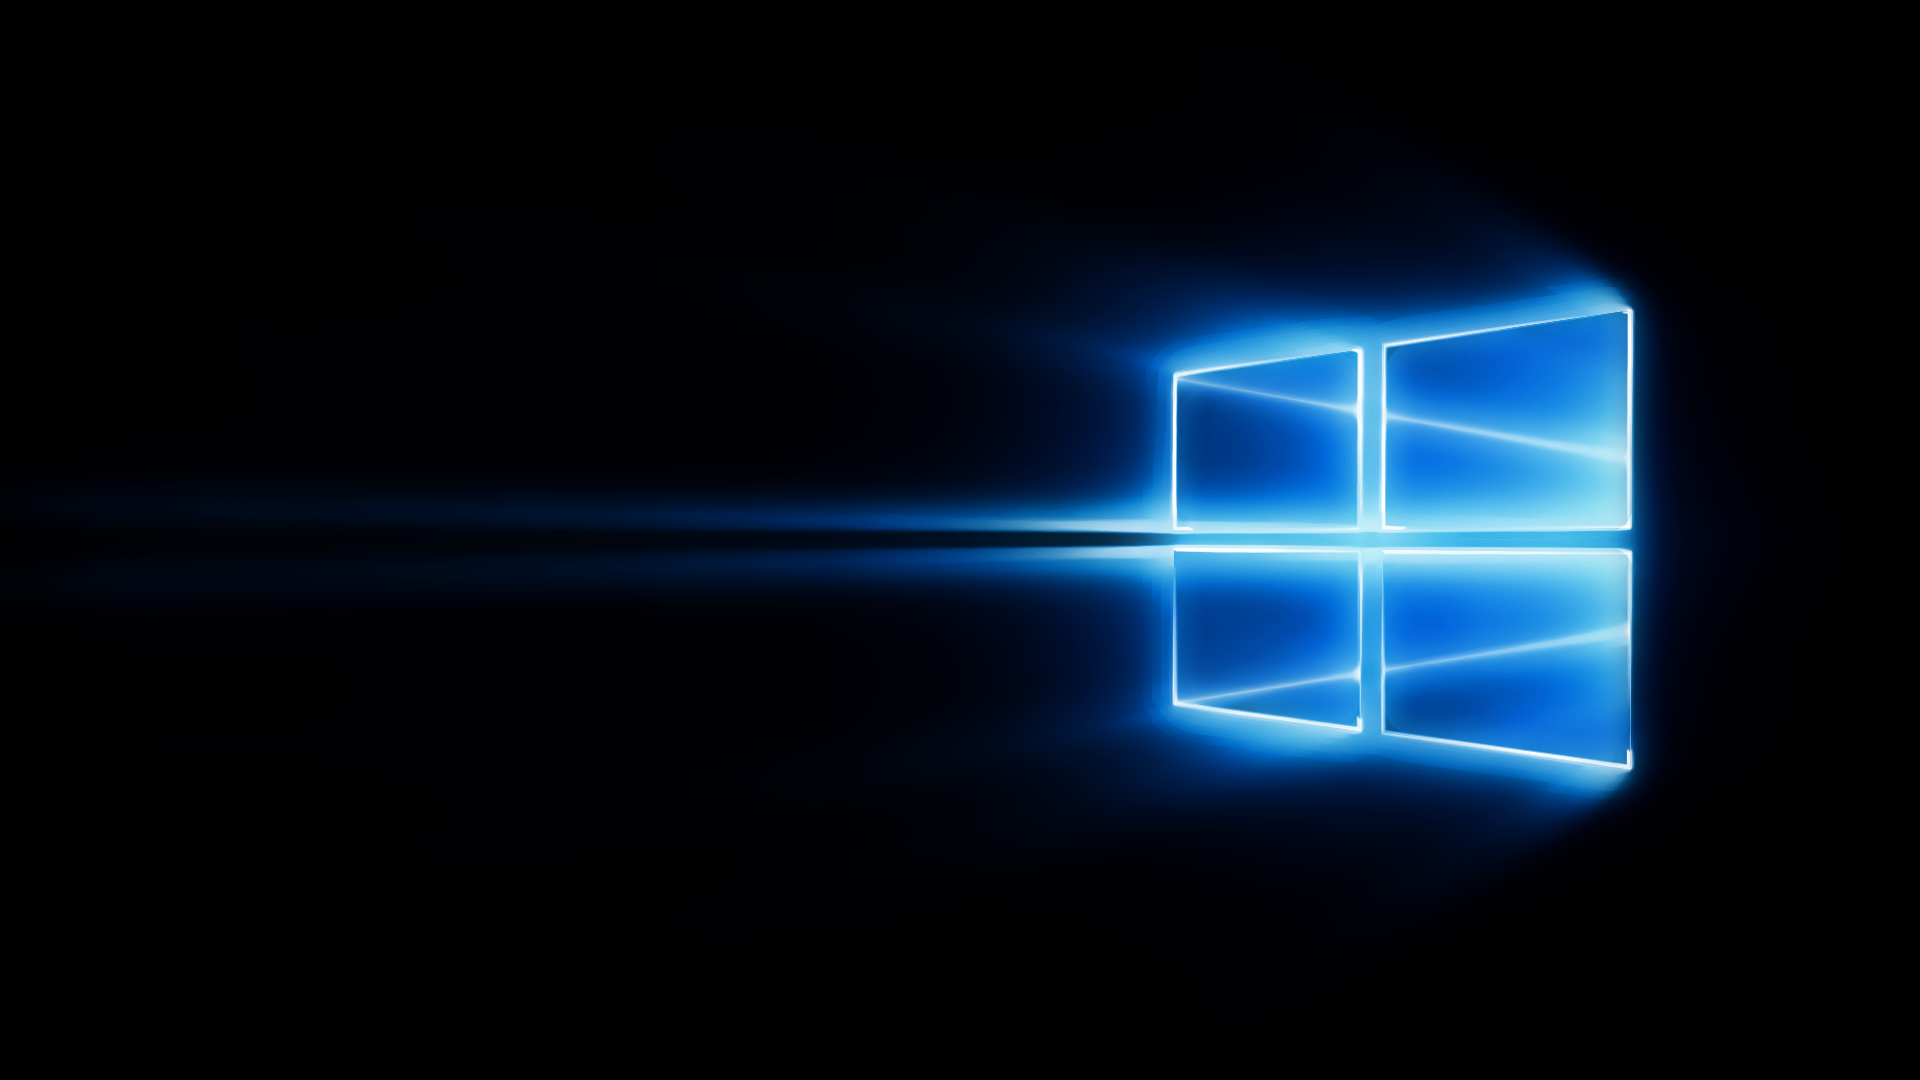 Windows 10 Wallpaper Backgrounds 2876   HD Wallpapers Site